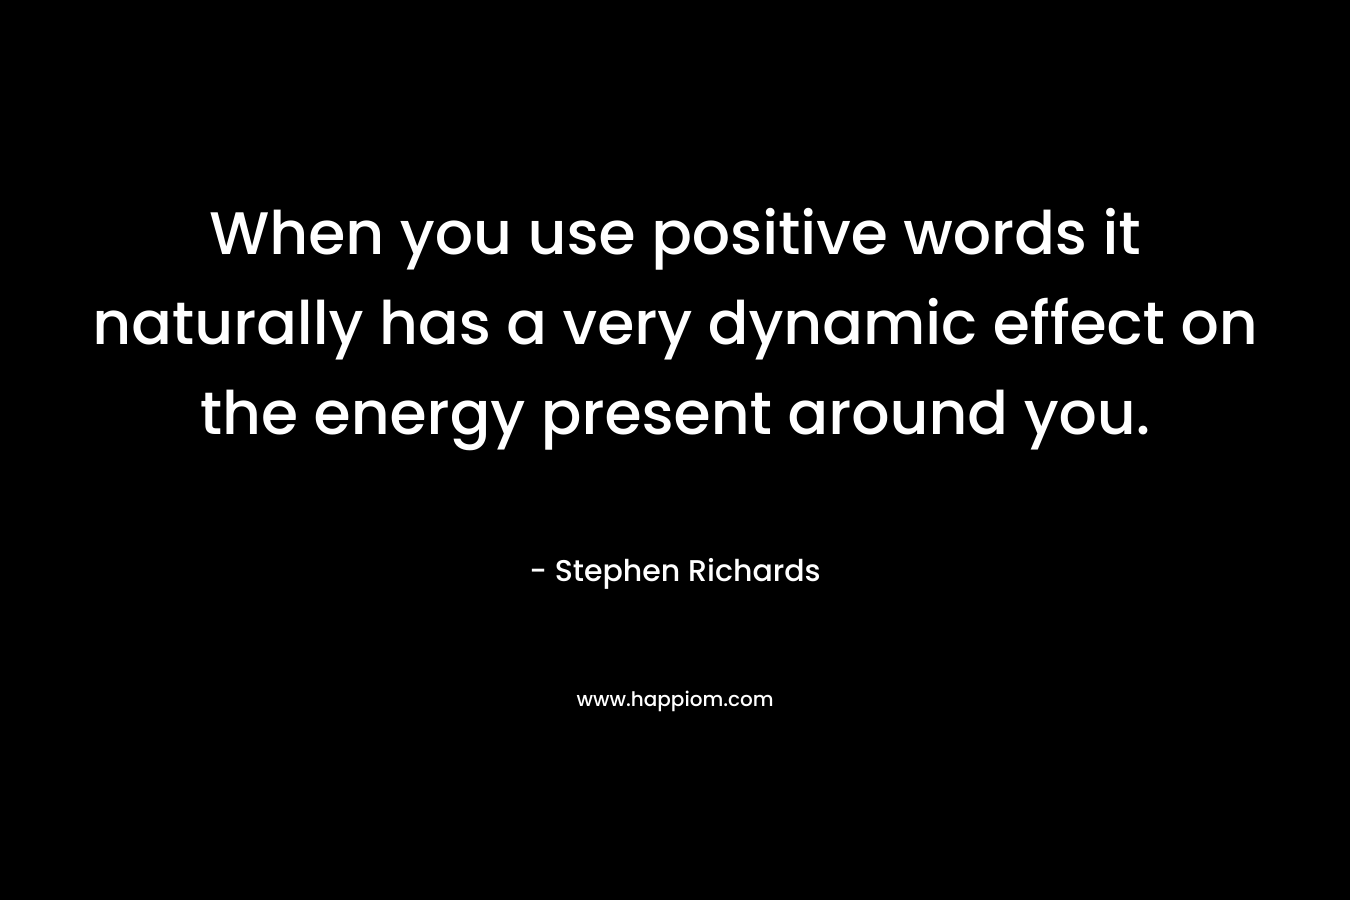 When you use positive words it naturally has a very dynamic effect on the energy present around you.